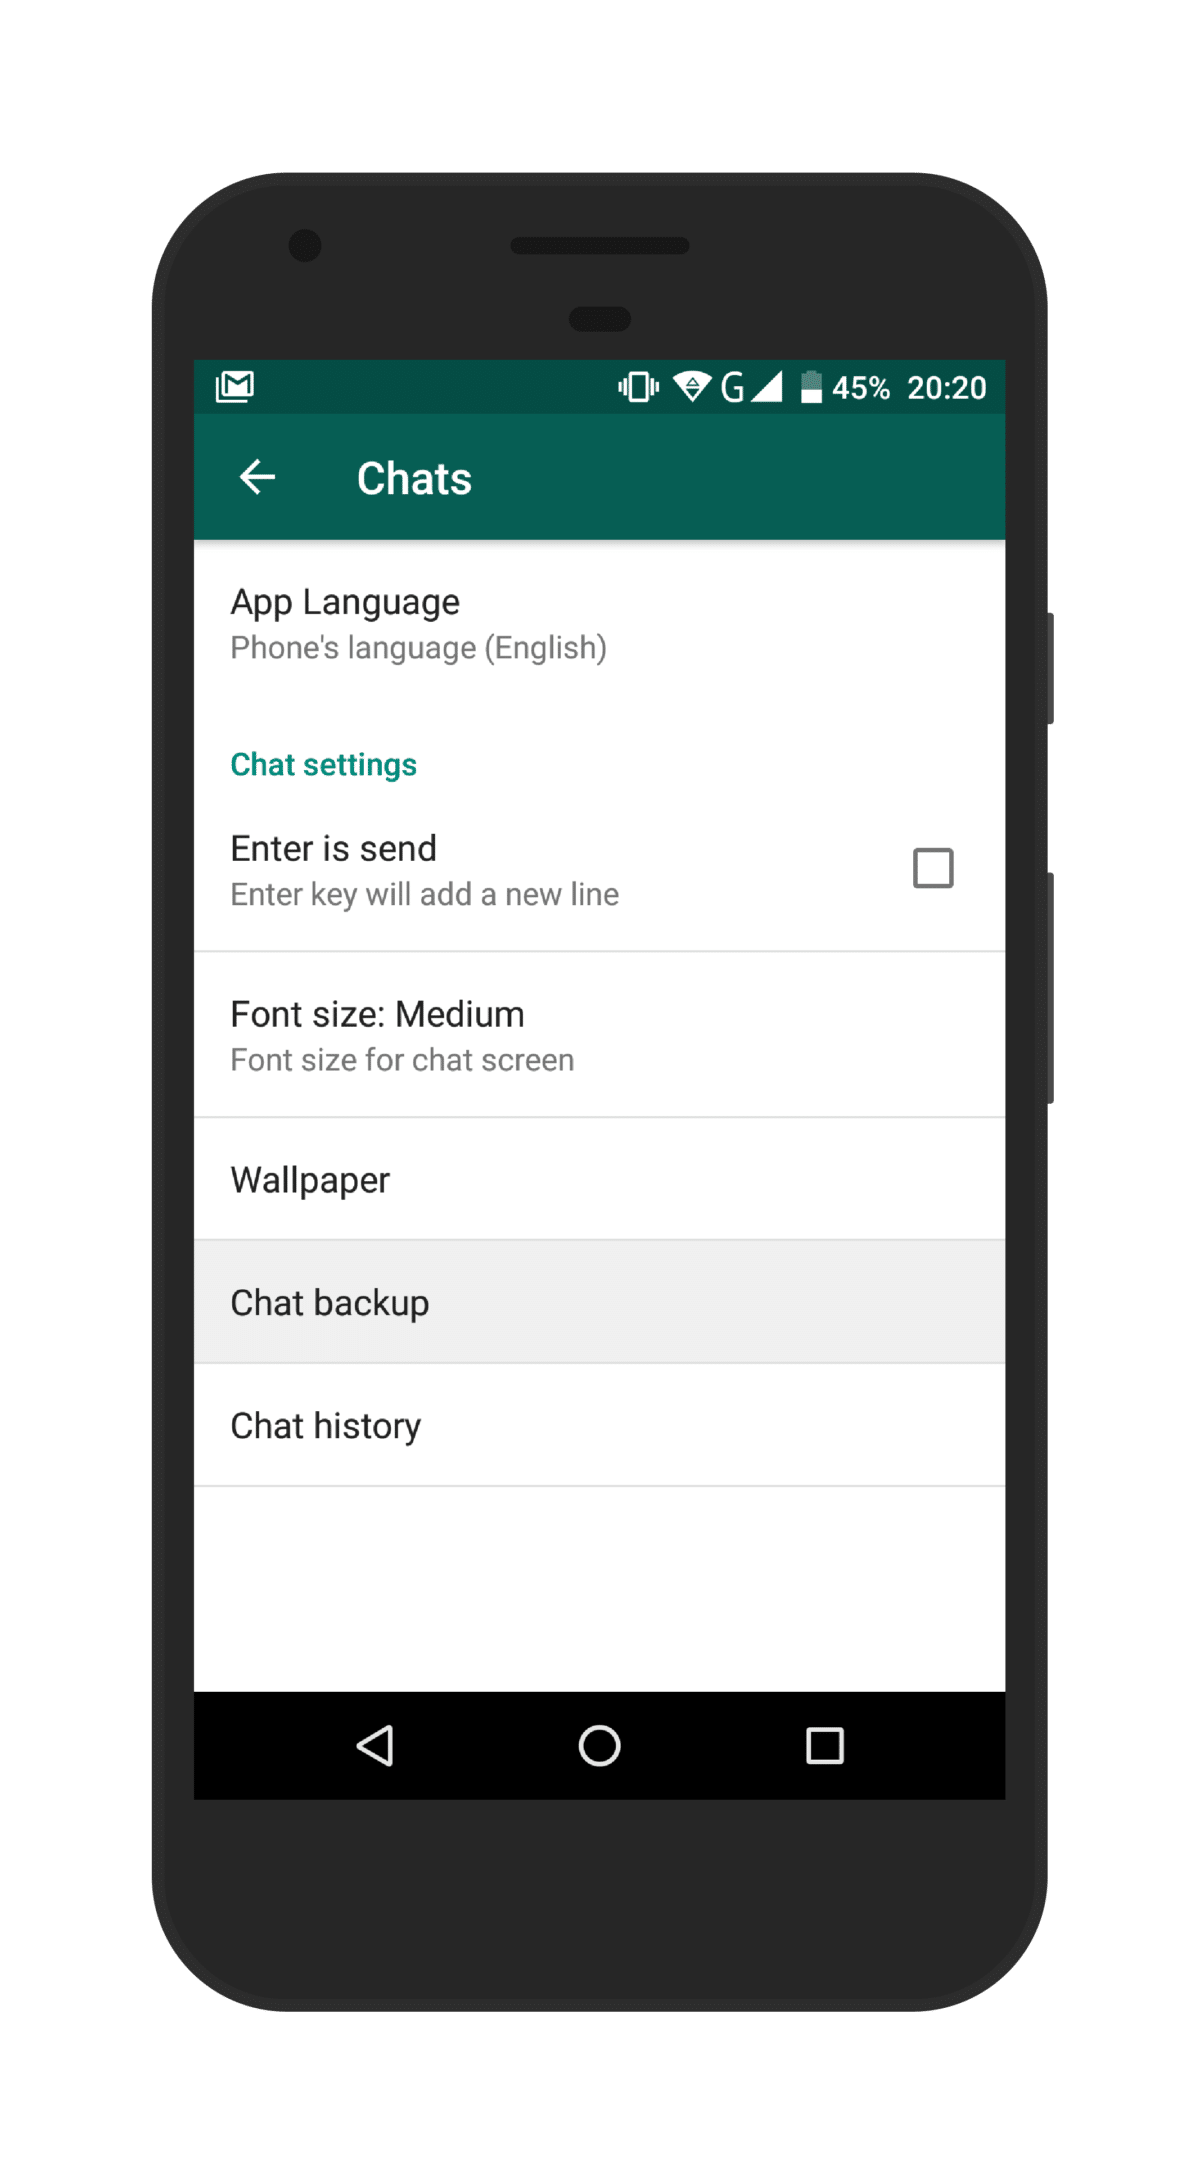 GBWhatsApp On Android without losing Chats